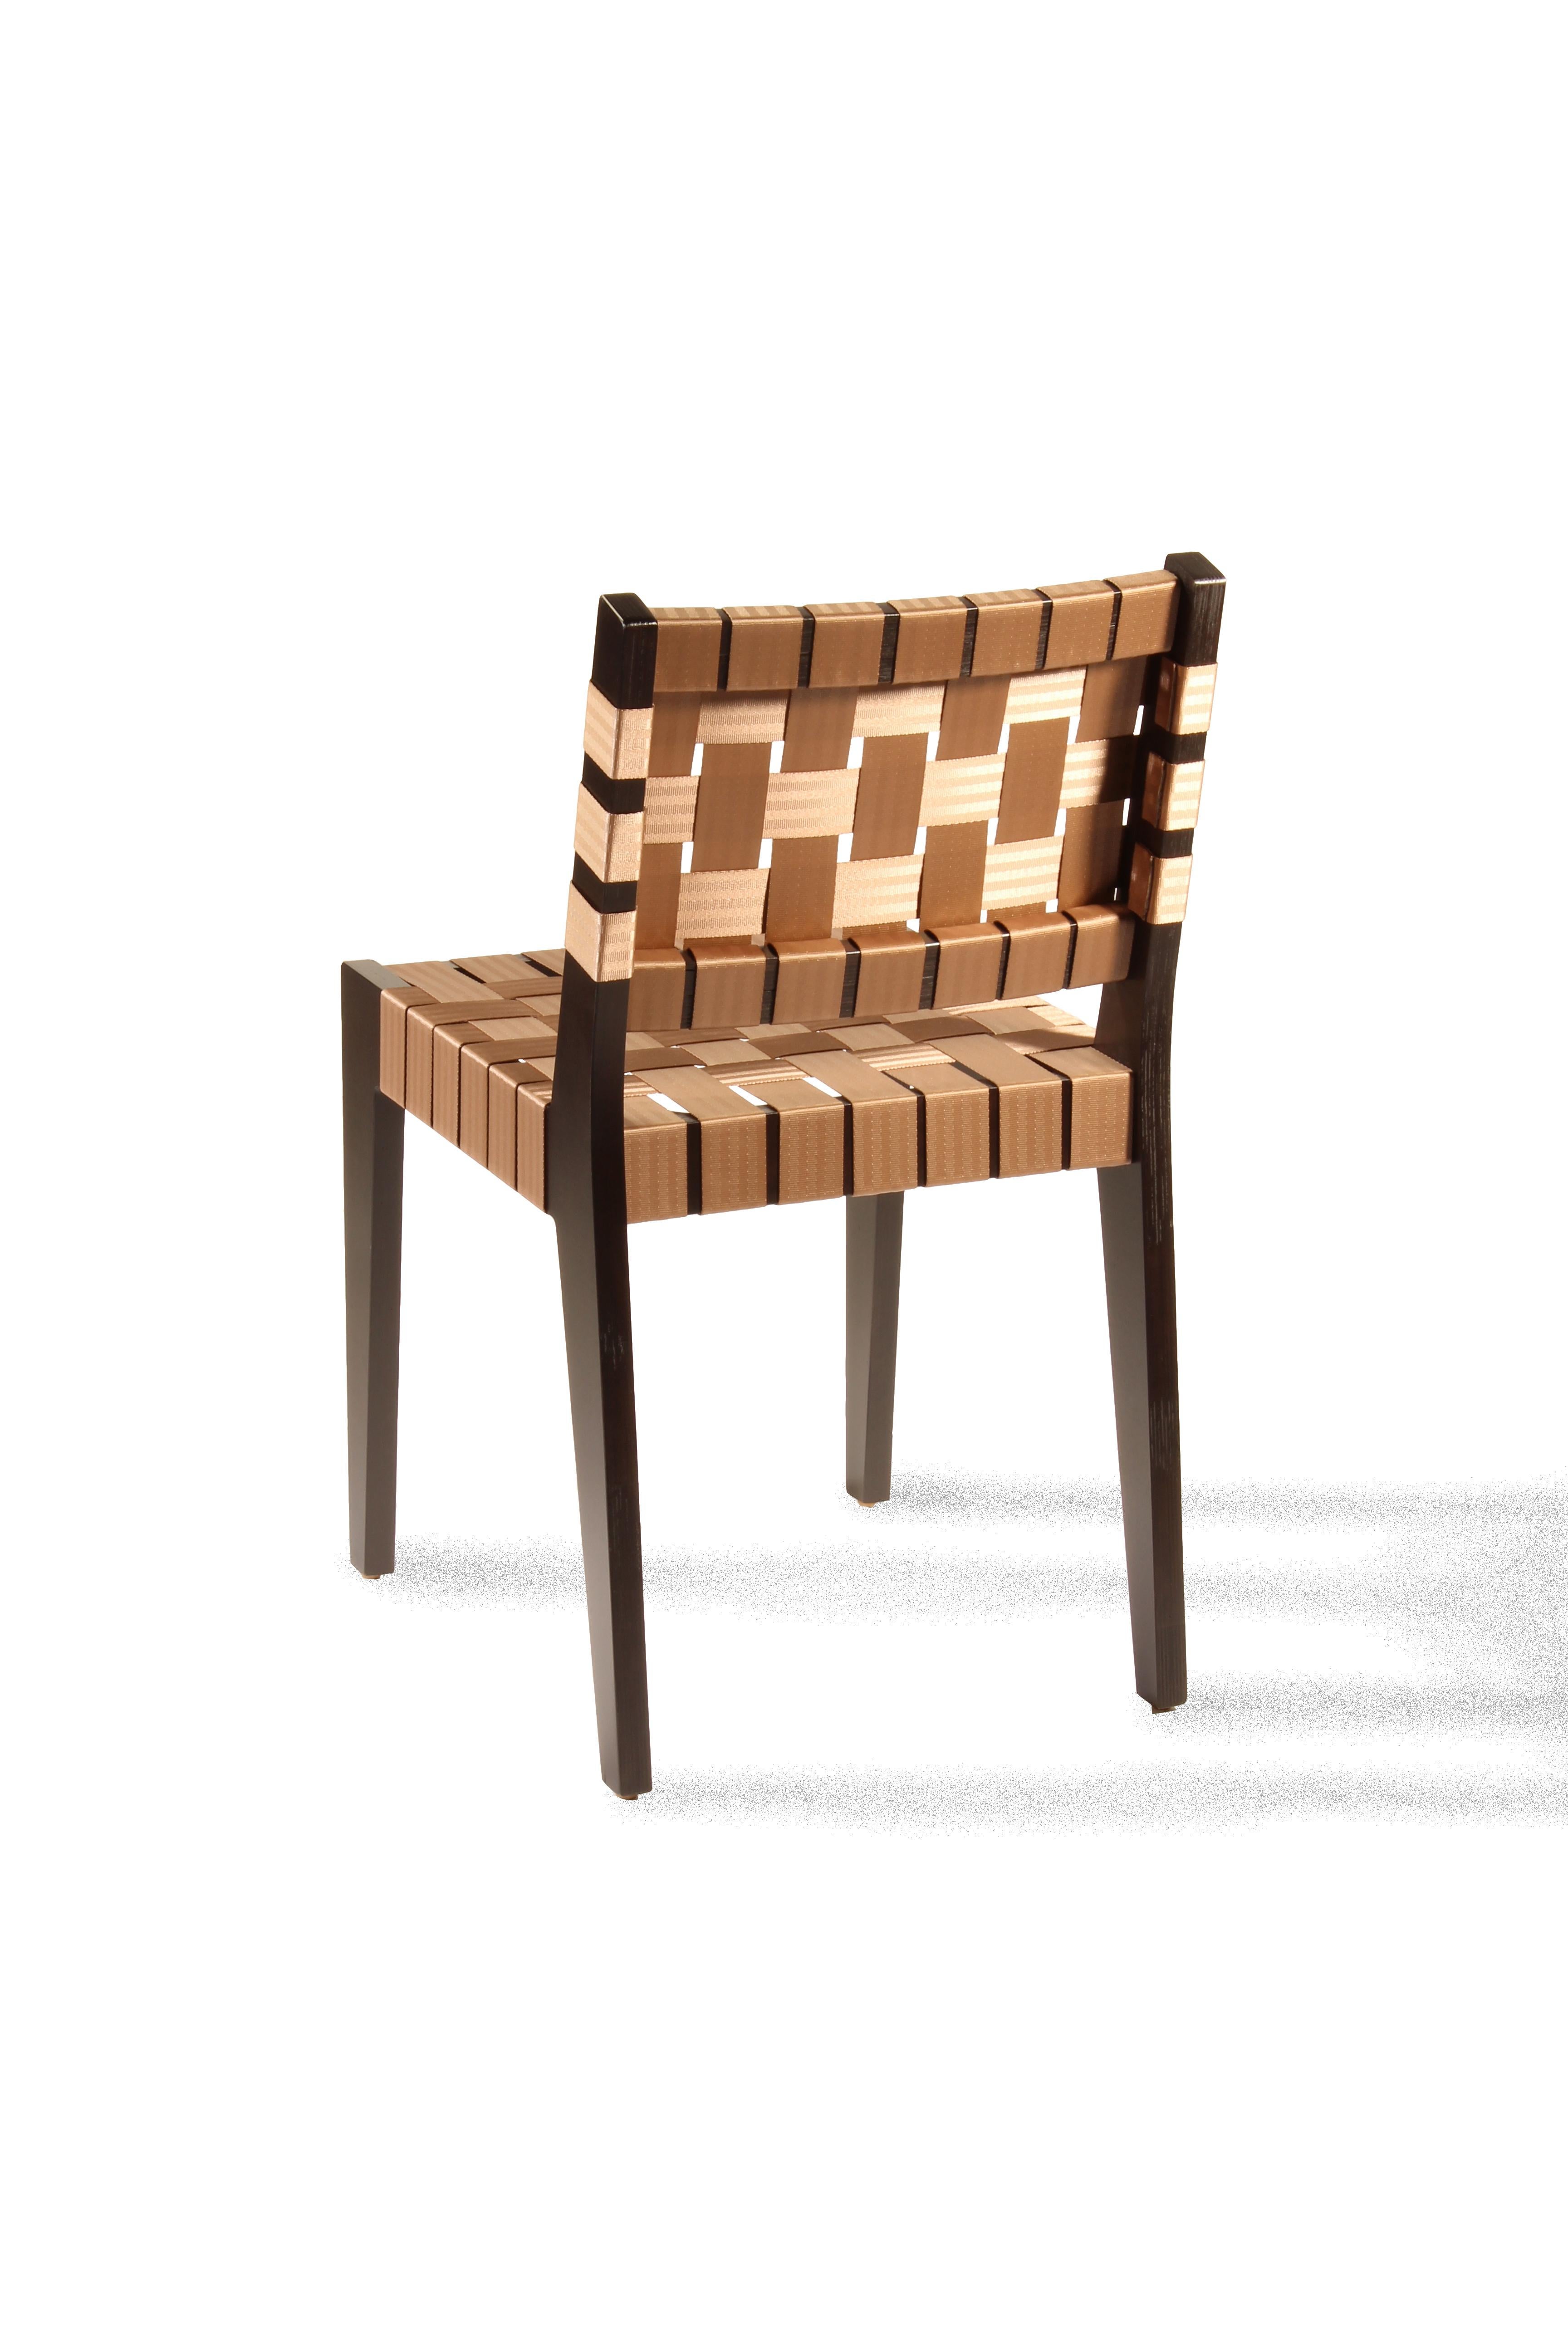 Birch Basket weave woven strap, fabric seat, Maple Side Chair. Made in USA by Danko For Sale